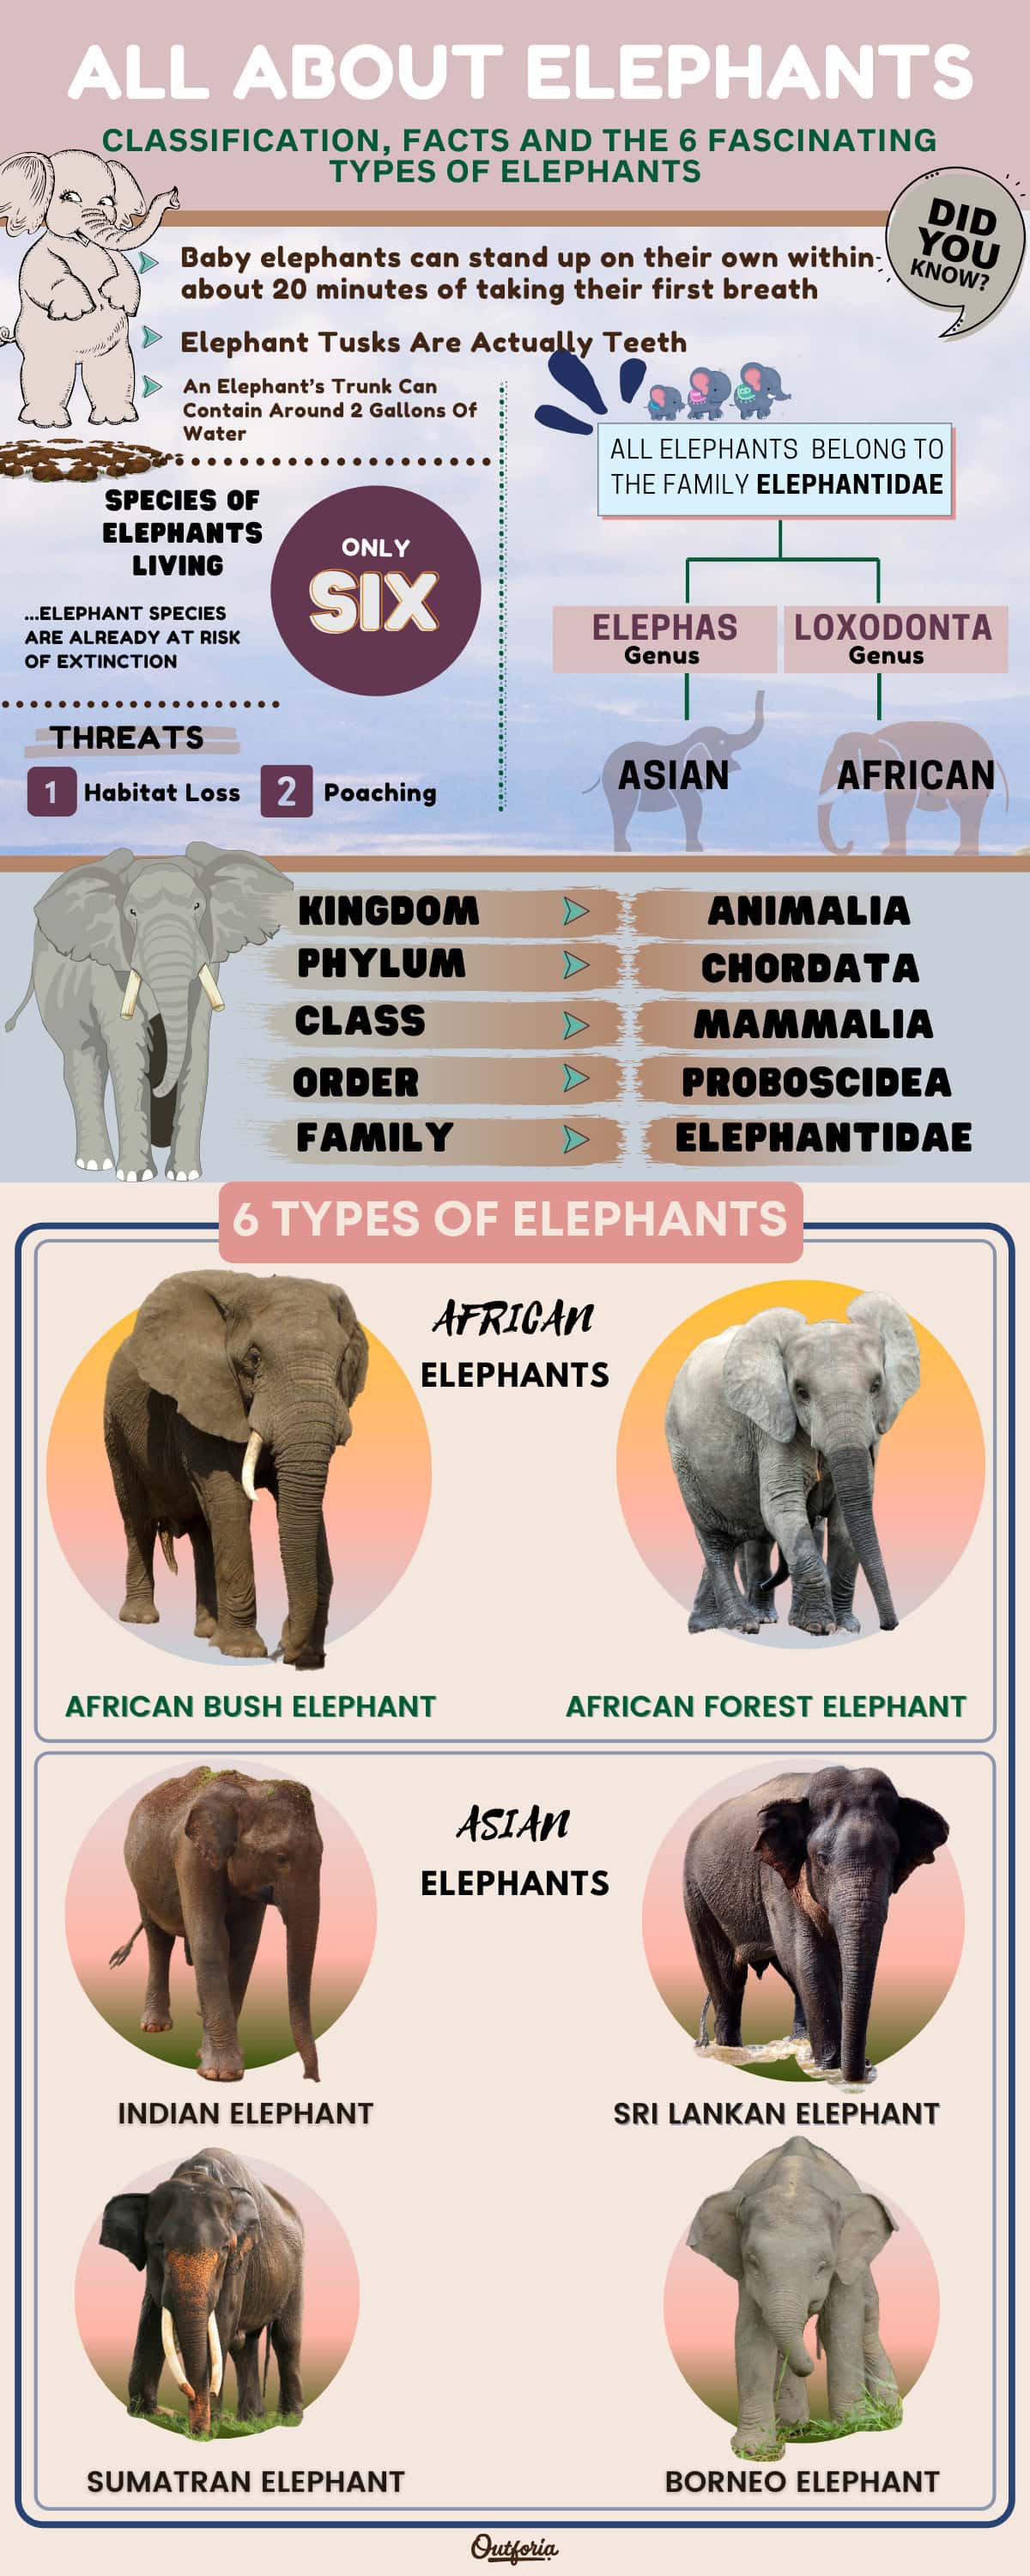 chart of the different types of elephants with classification, names, images, and facts